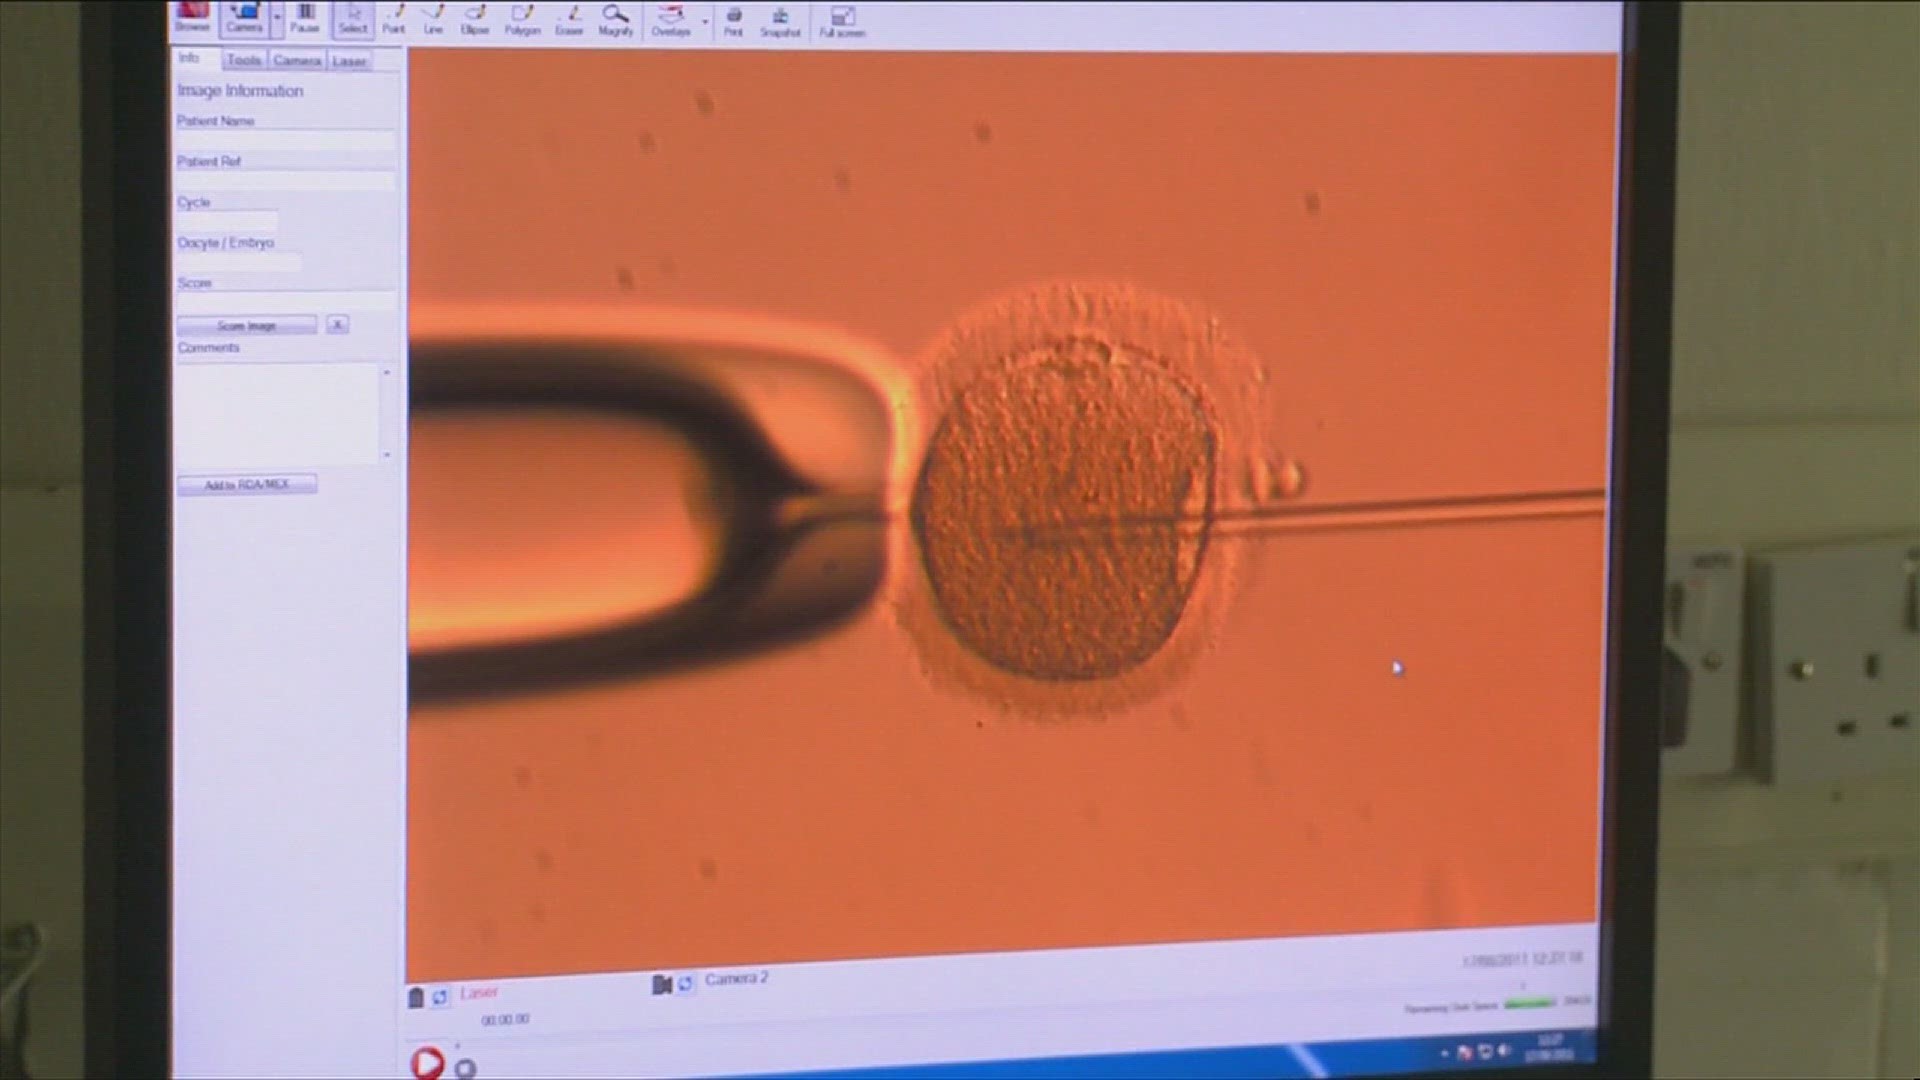 At least three IVF providers halted operations after the ruling due to potential legal ramifications.